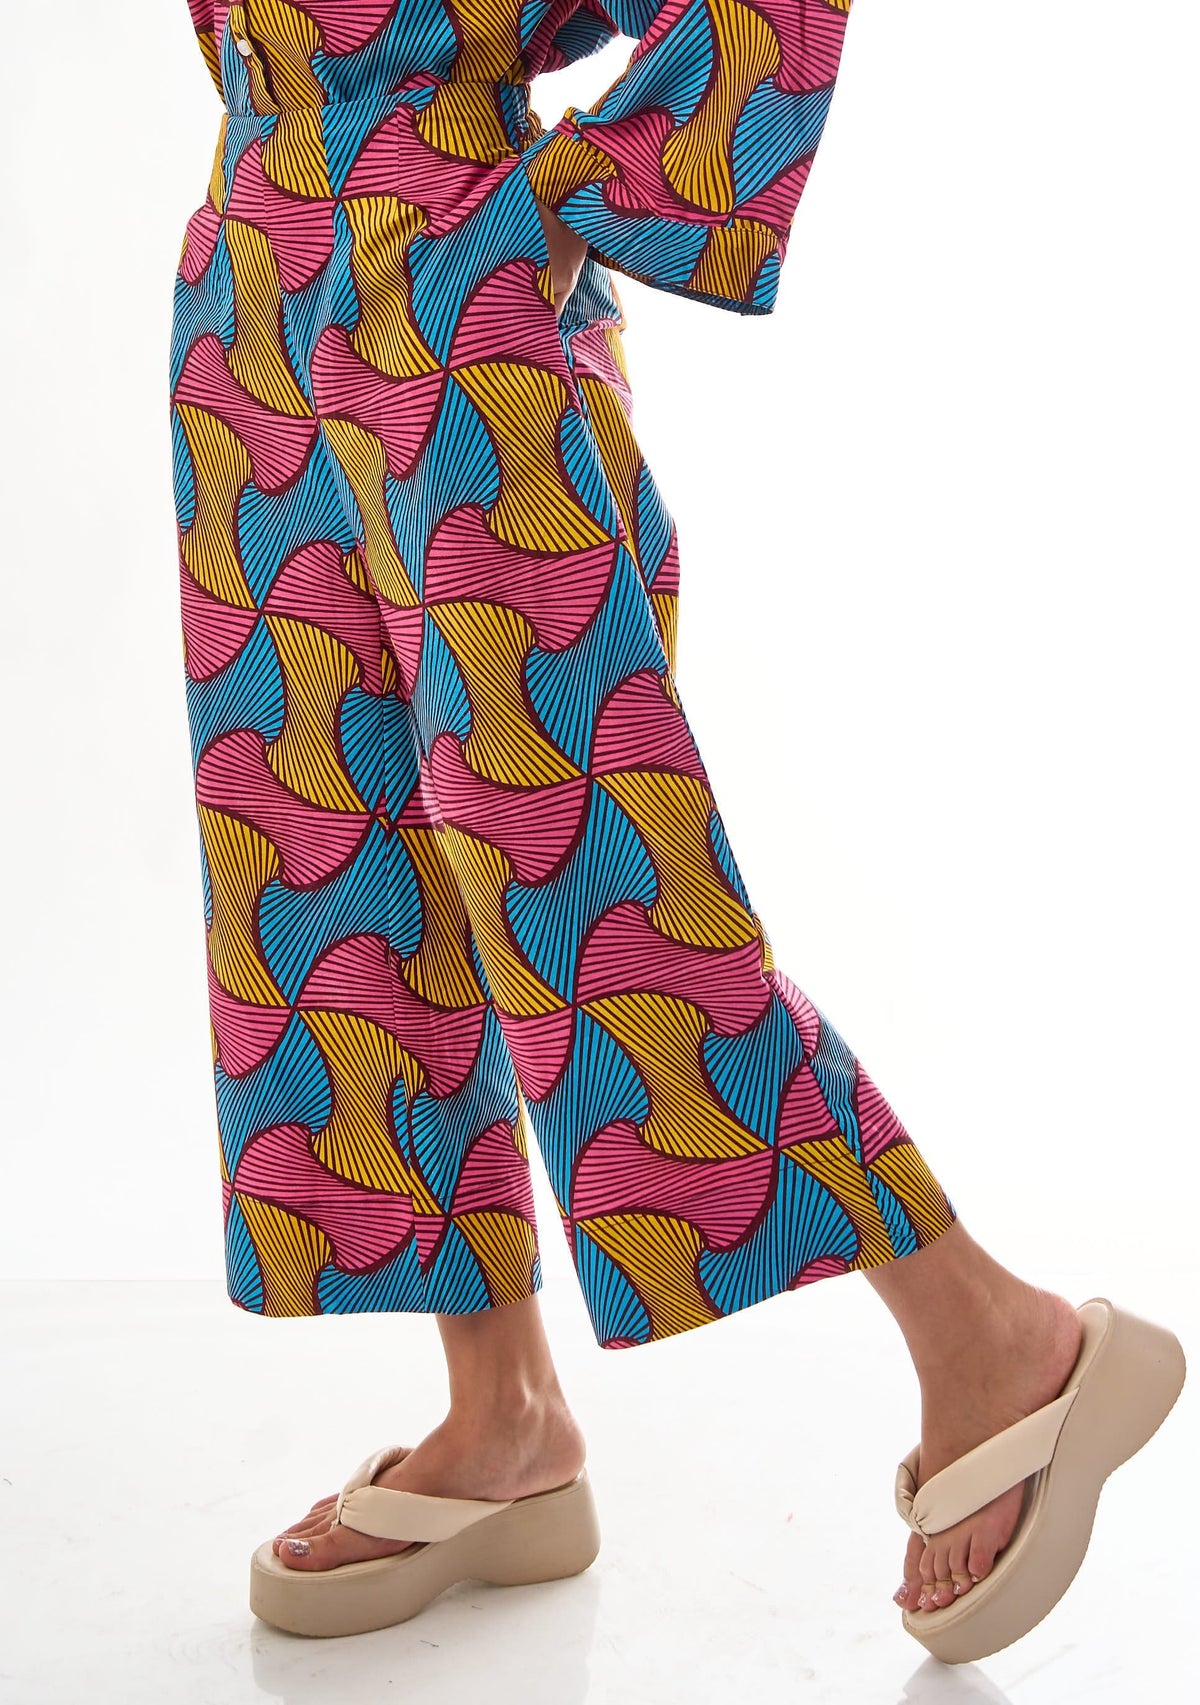 YEVU | Women's Socially Responsible African Print Clothing – Page 4